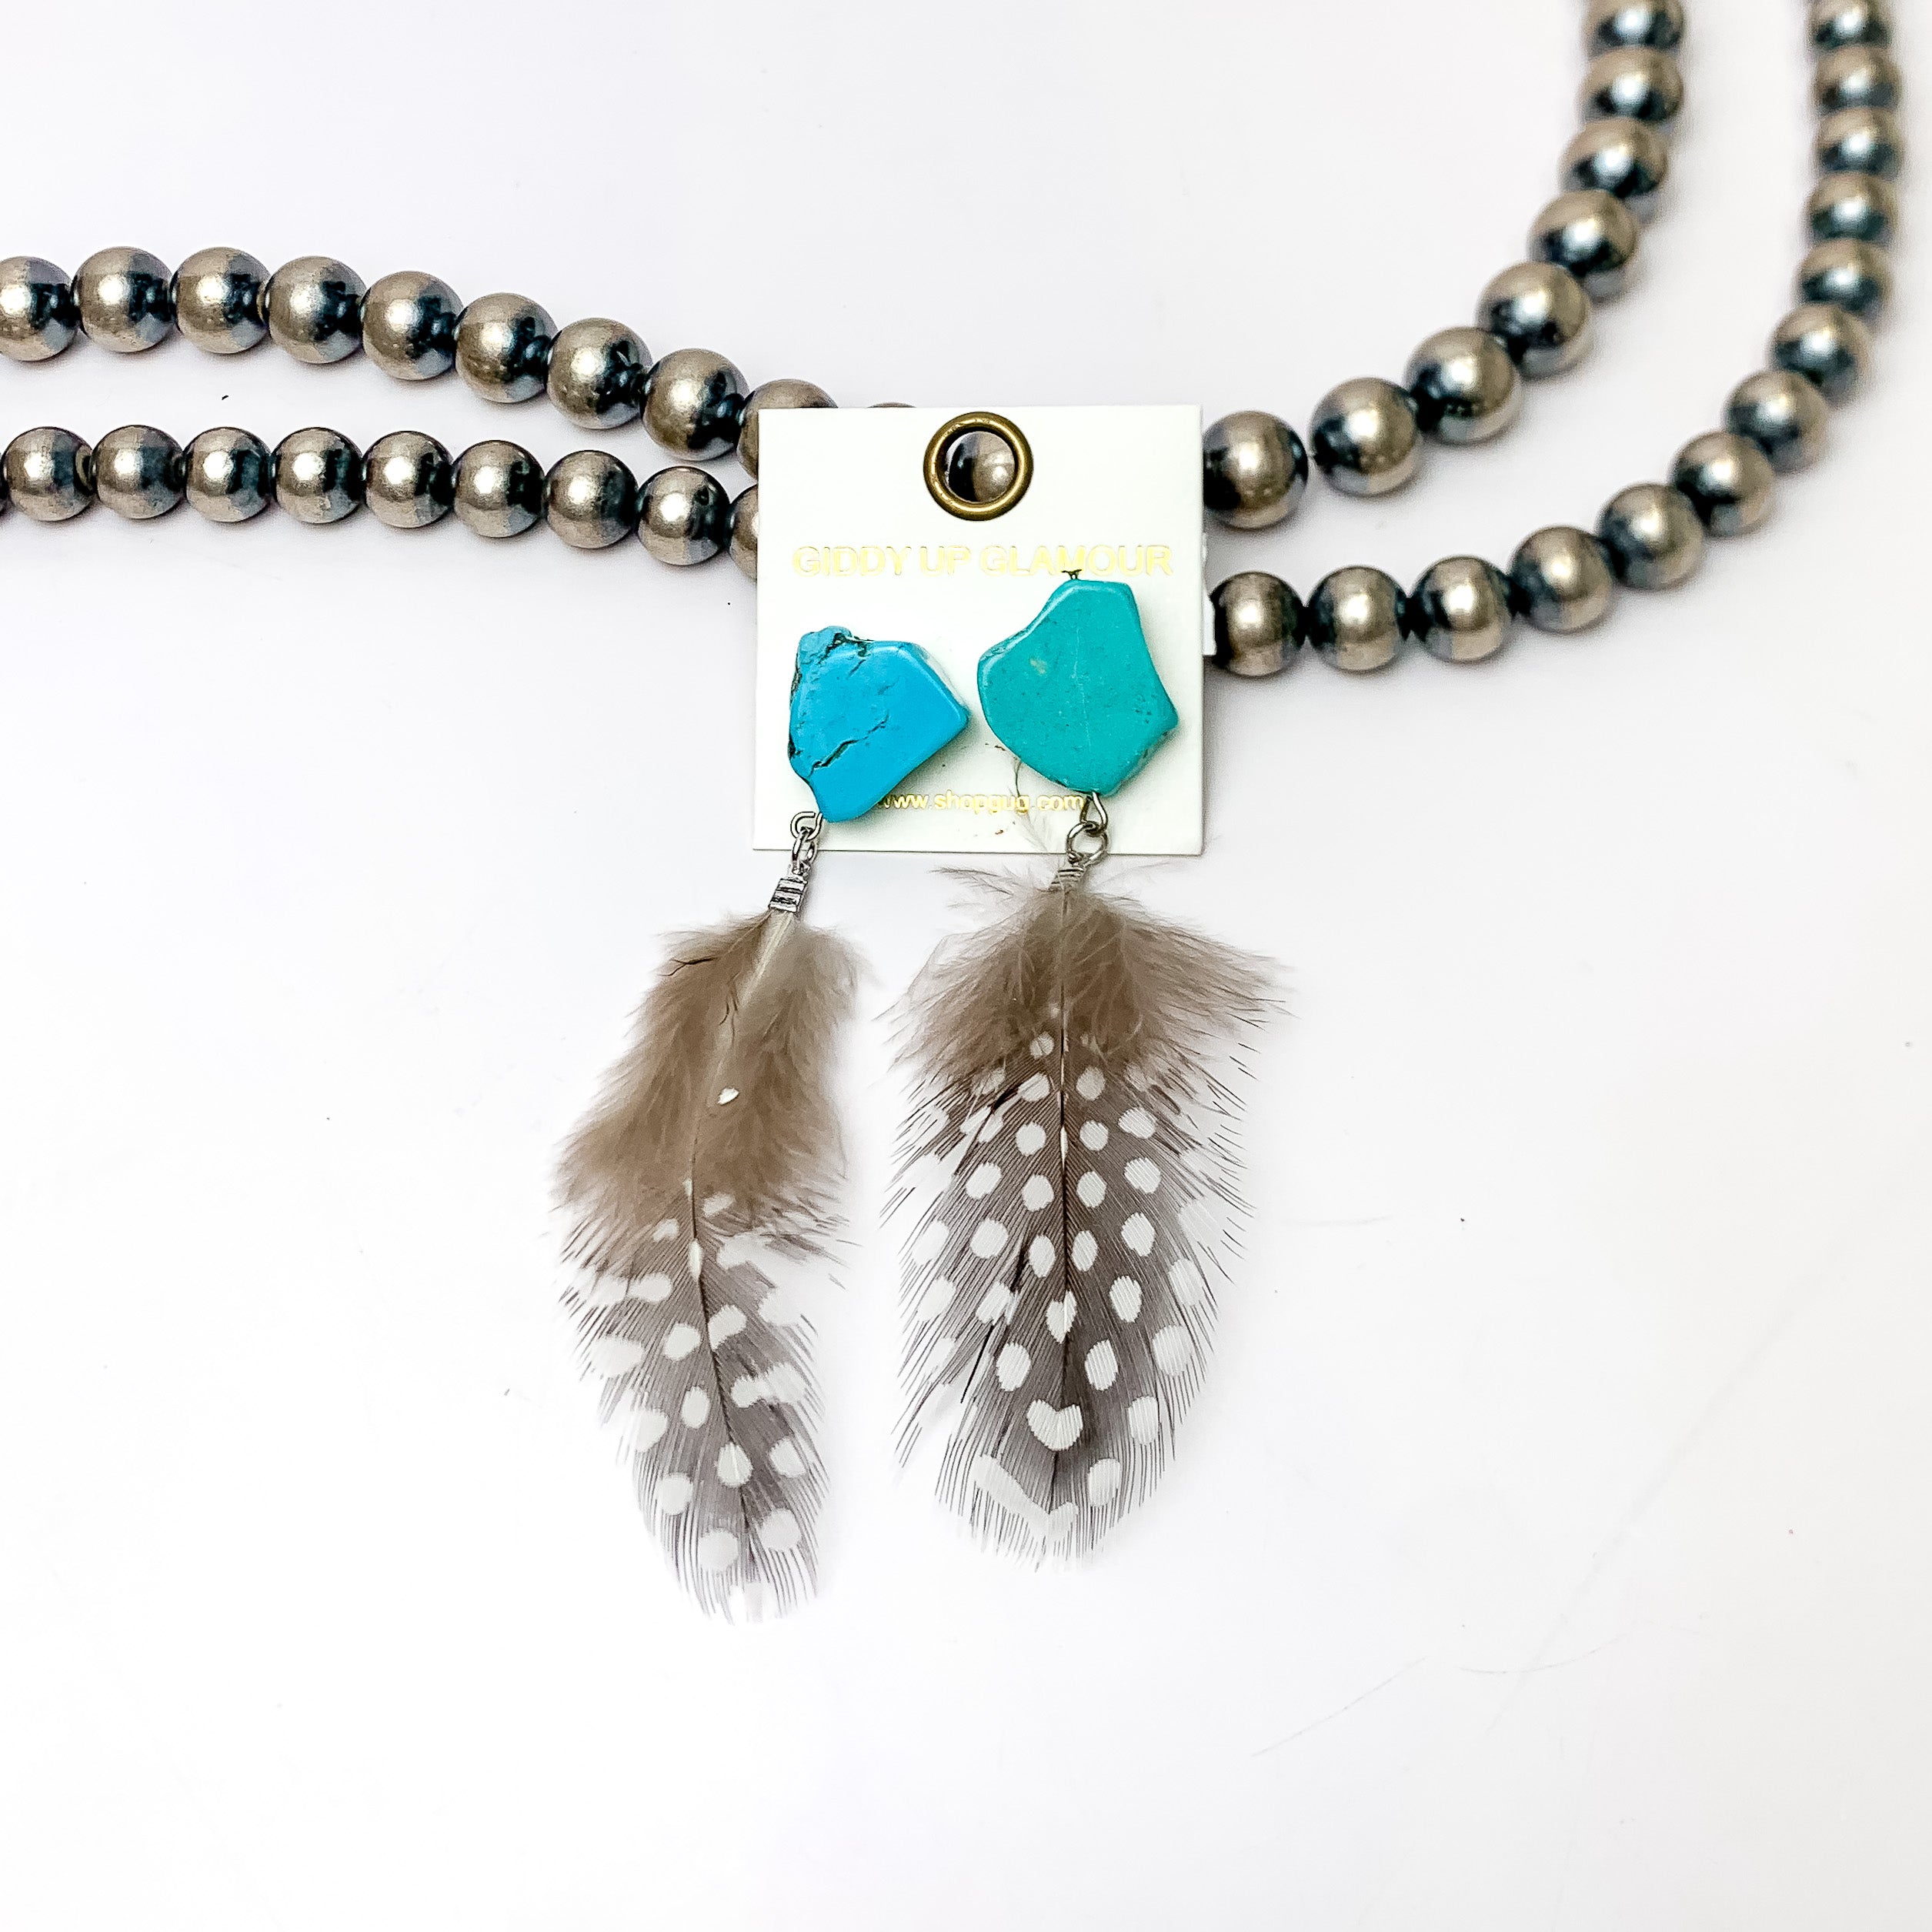 Turquoise Stone Post Feather Earrings in Brown and Black. These Earrings are pictured laying against Navajo pearls with a white background.